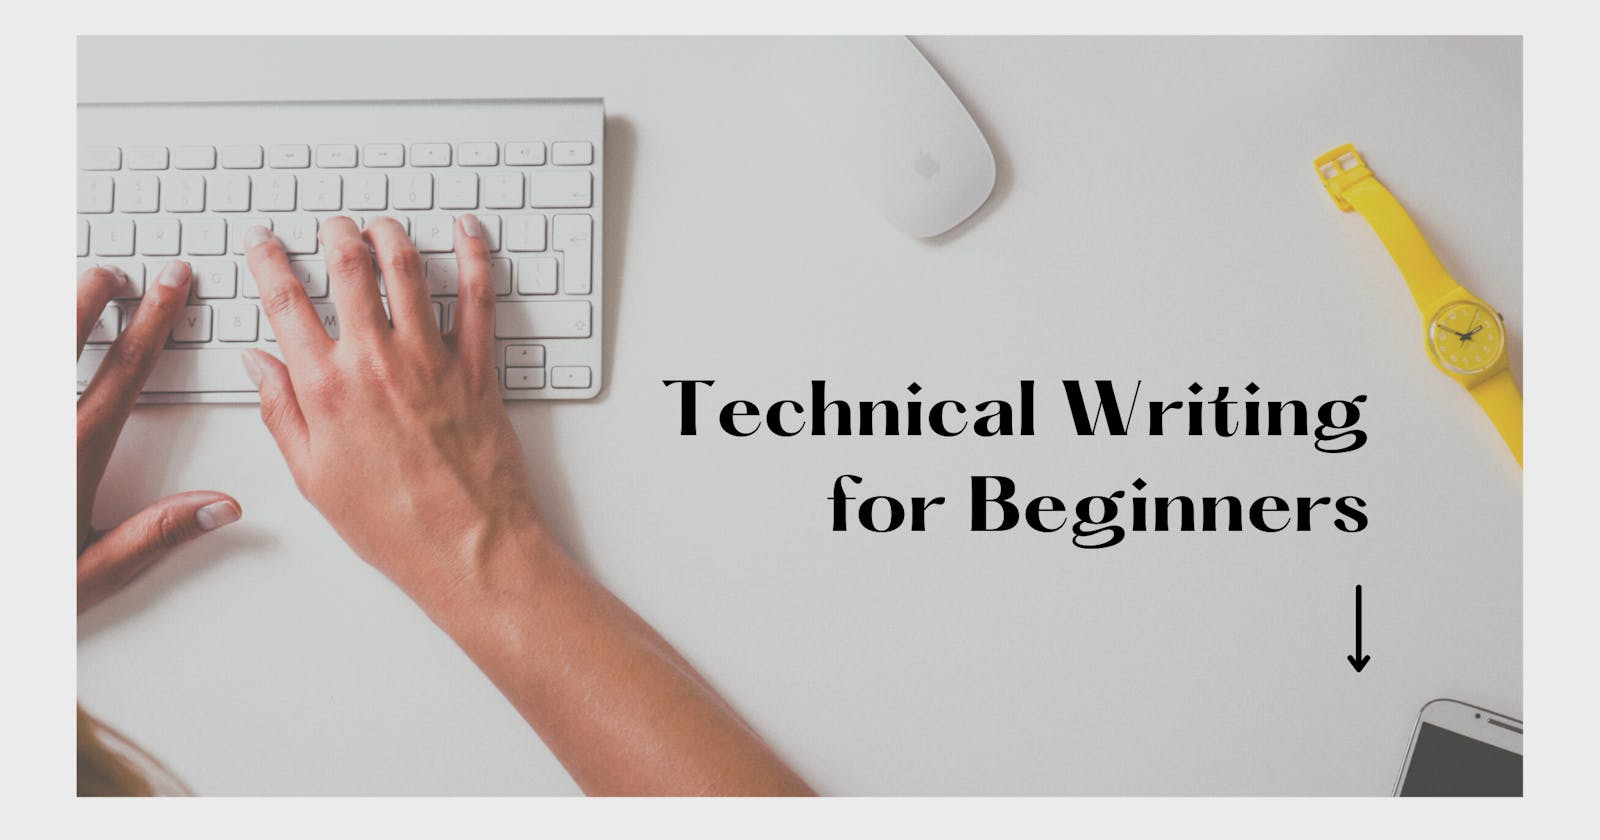 Technical Writing for Beginners: Insight from the WriteTech Bootcamp